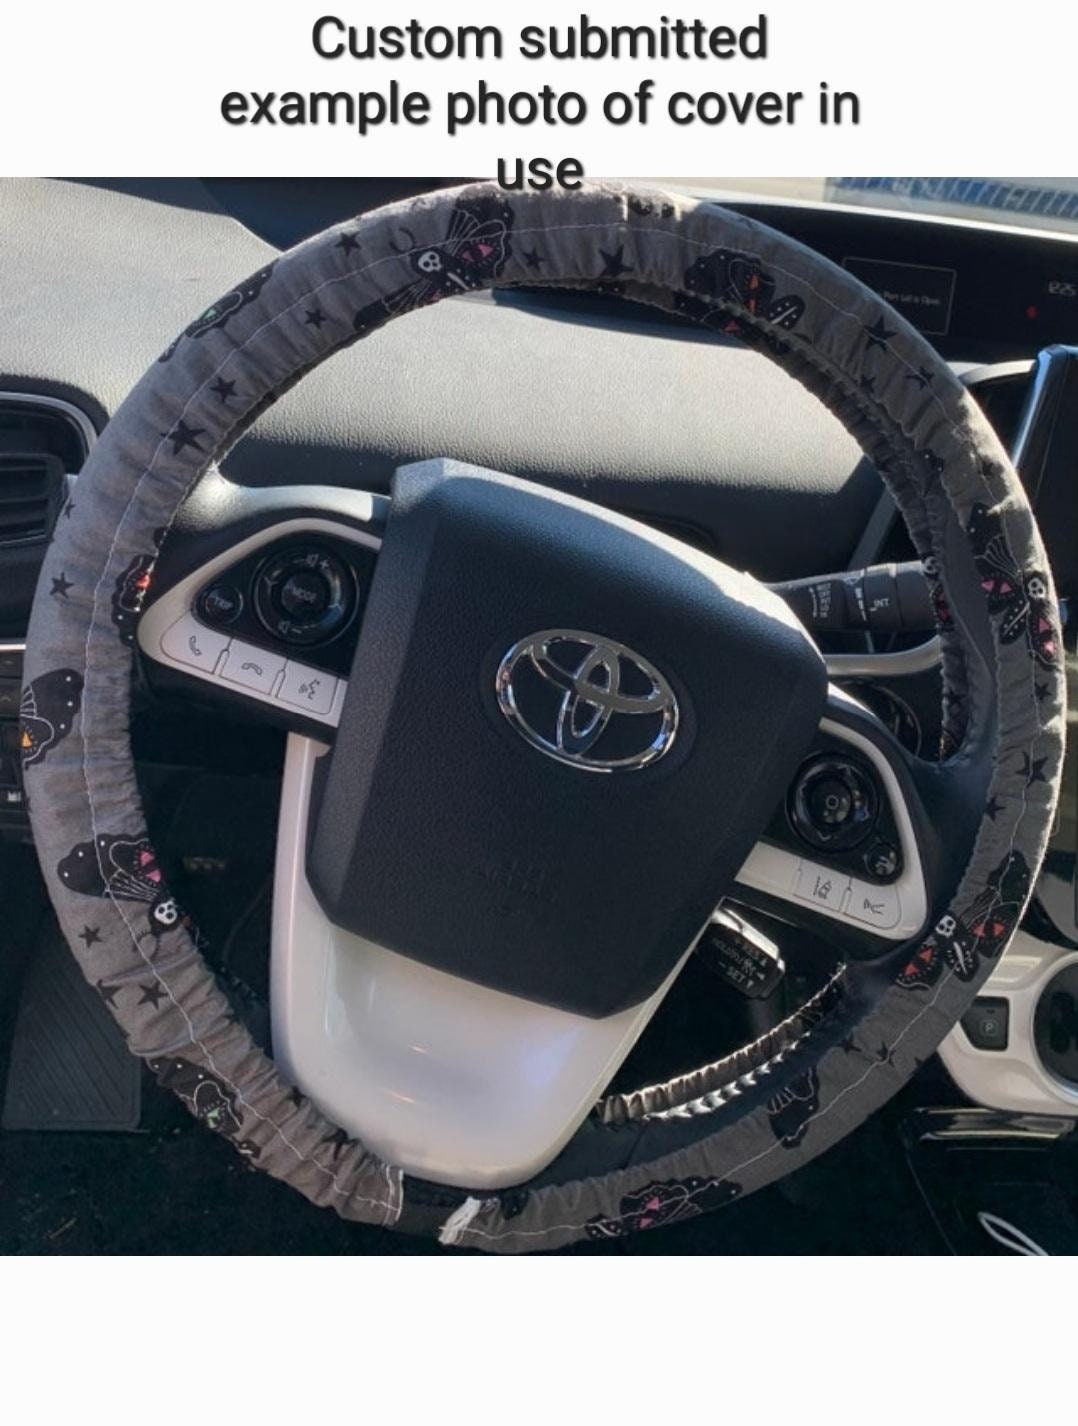 Flower Seed Packet Steering Wheel Cover - Harlow's Store and Garden Gifts